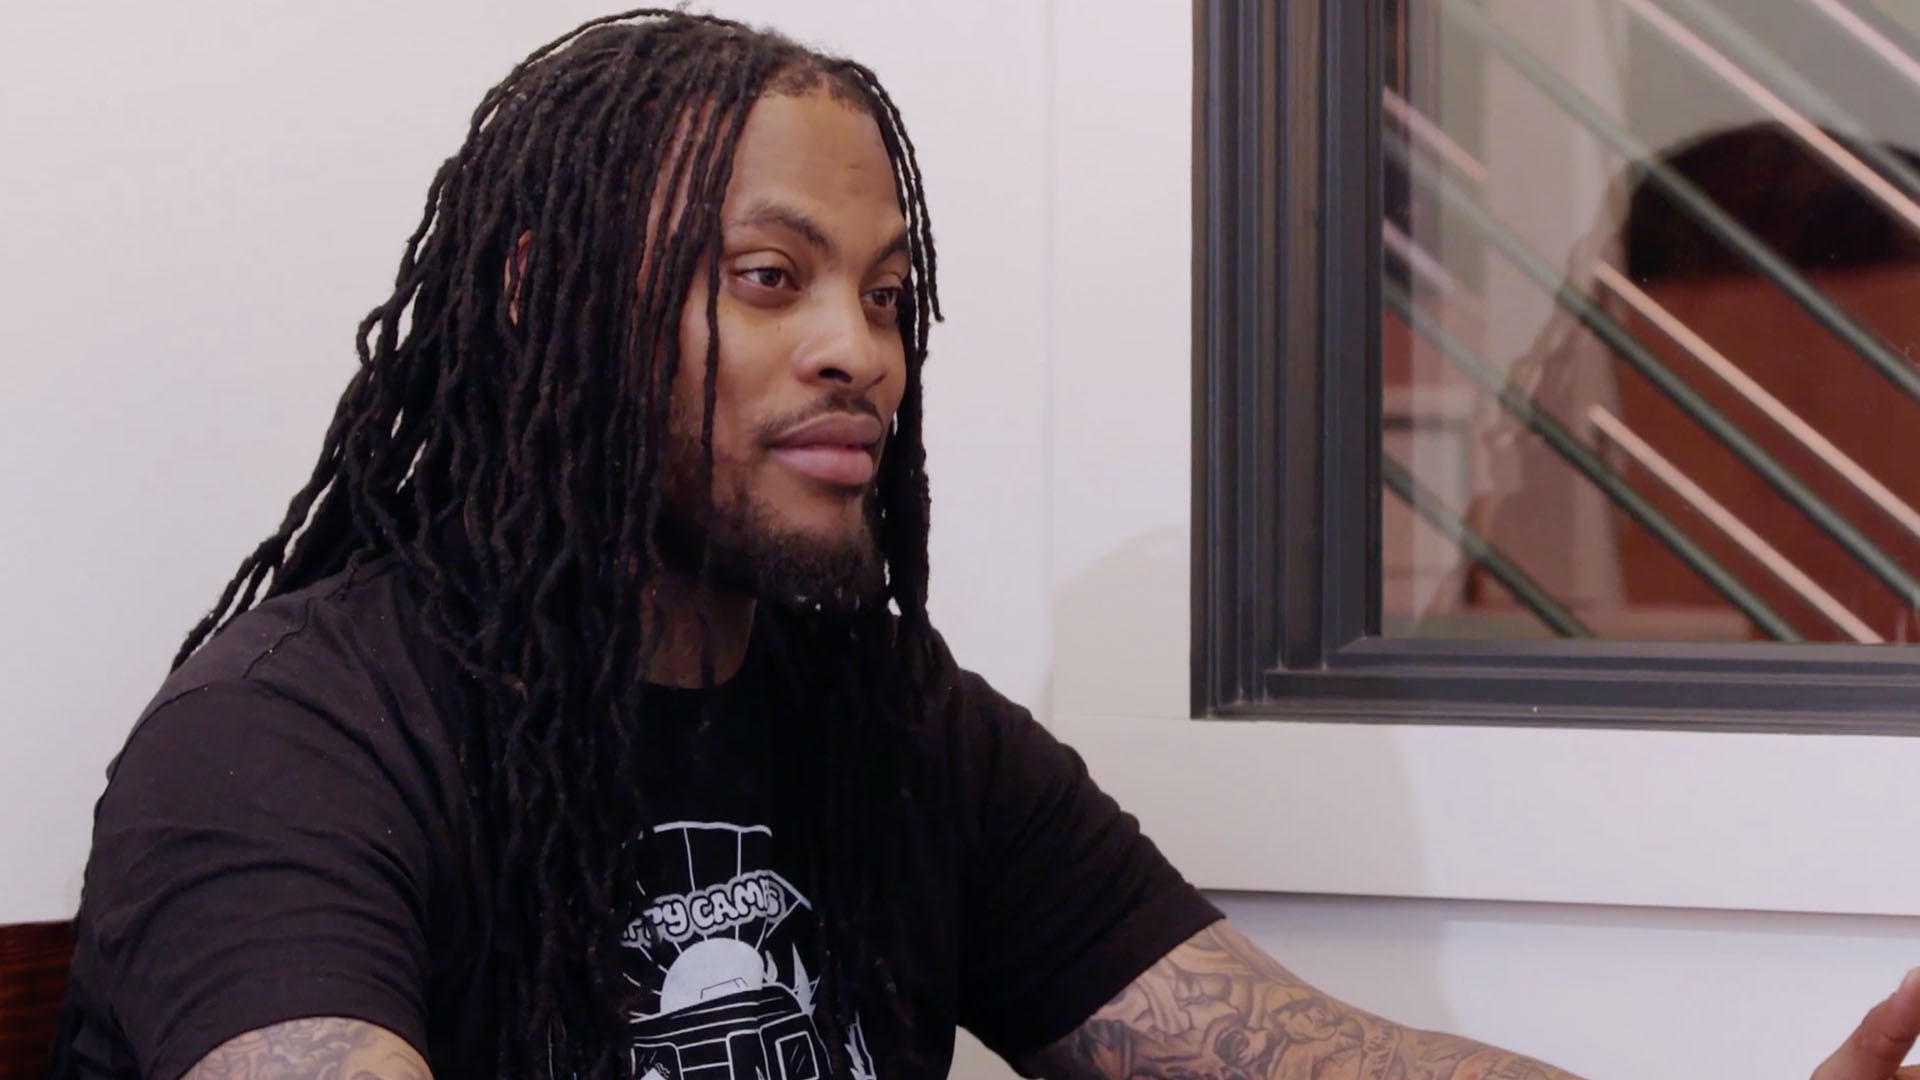 Watch Waka Has His Own View of Parenting | Waka & Tammy Video Extras